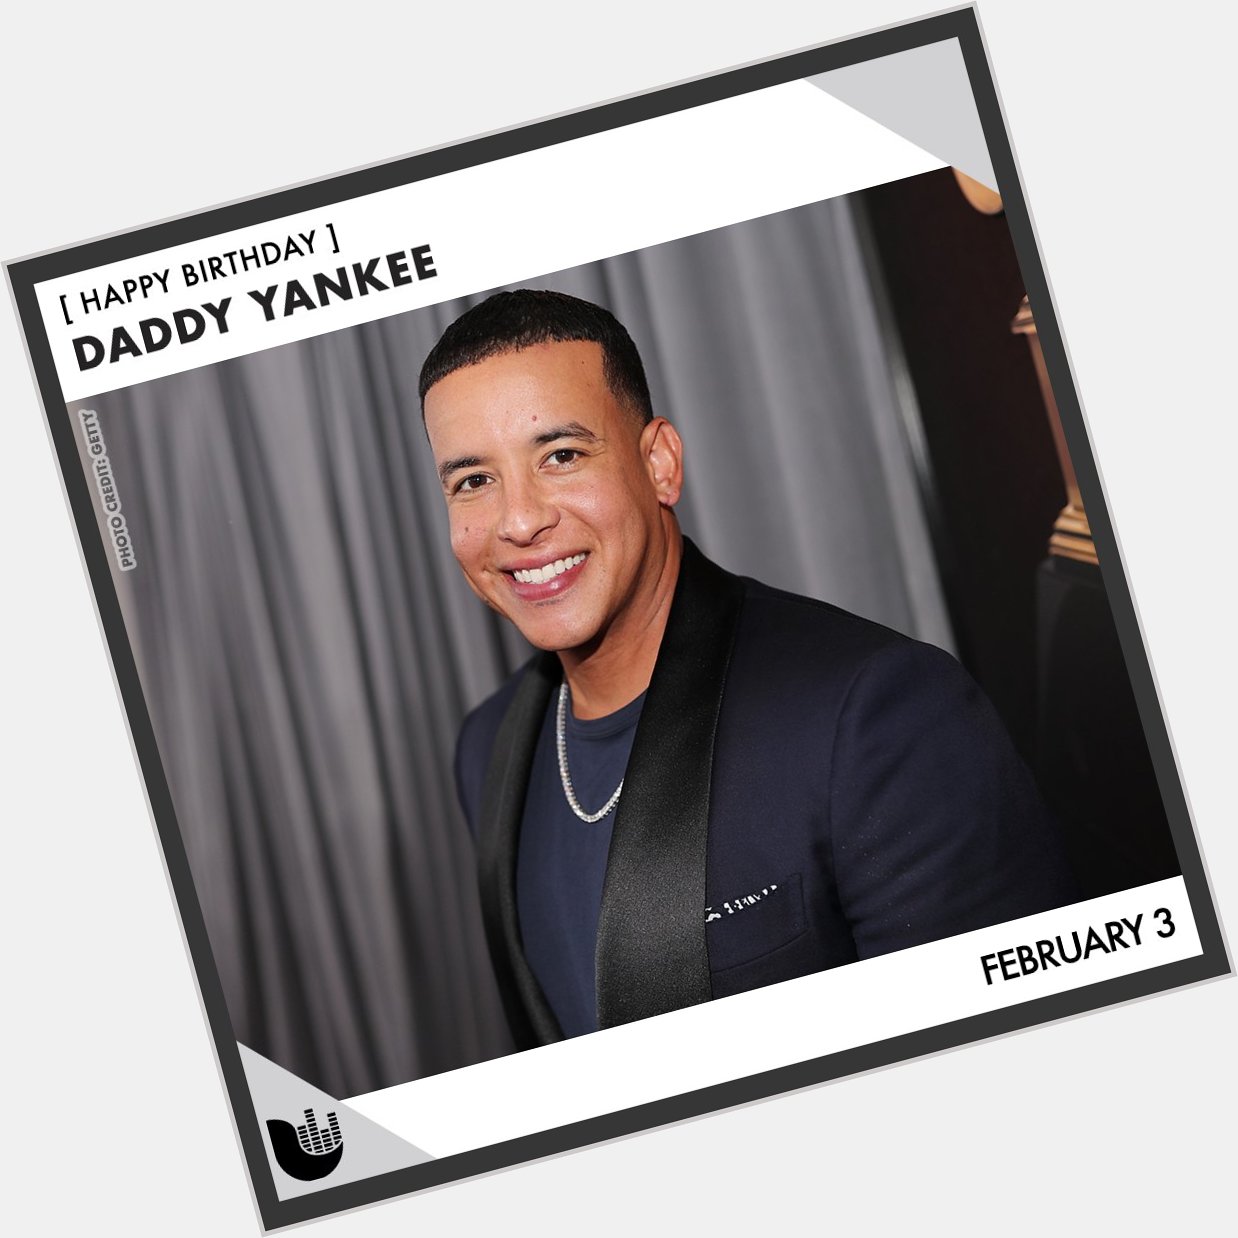 Join us in wishing a happy birthday to Daddy Yankee! 